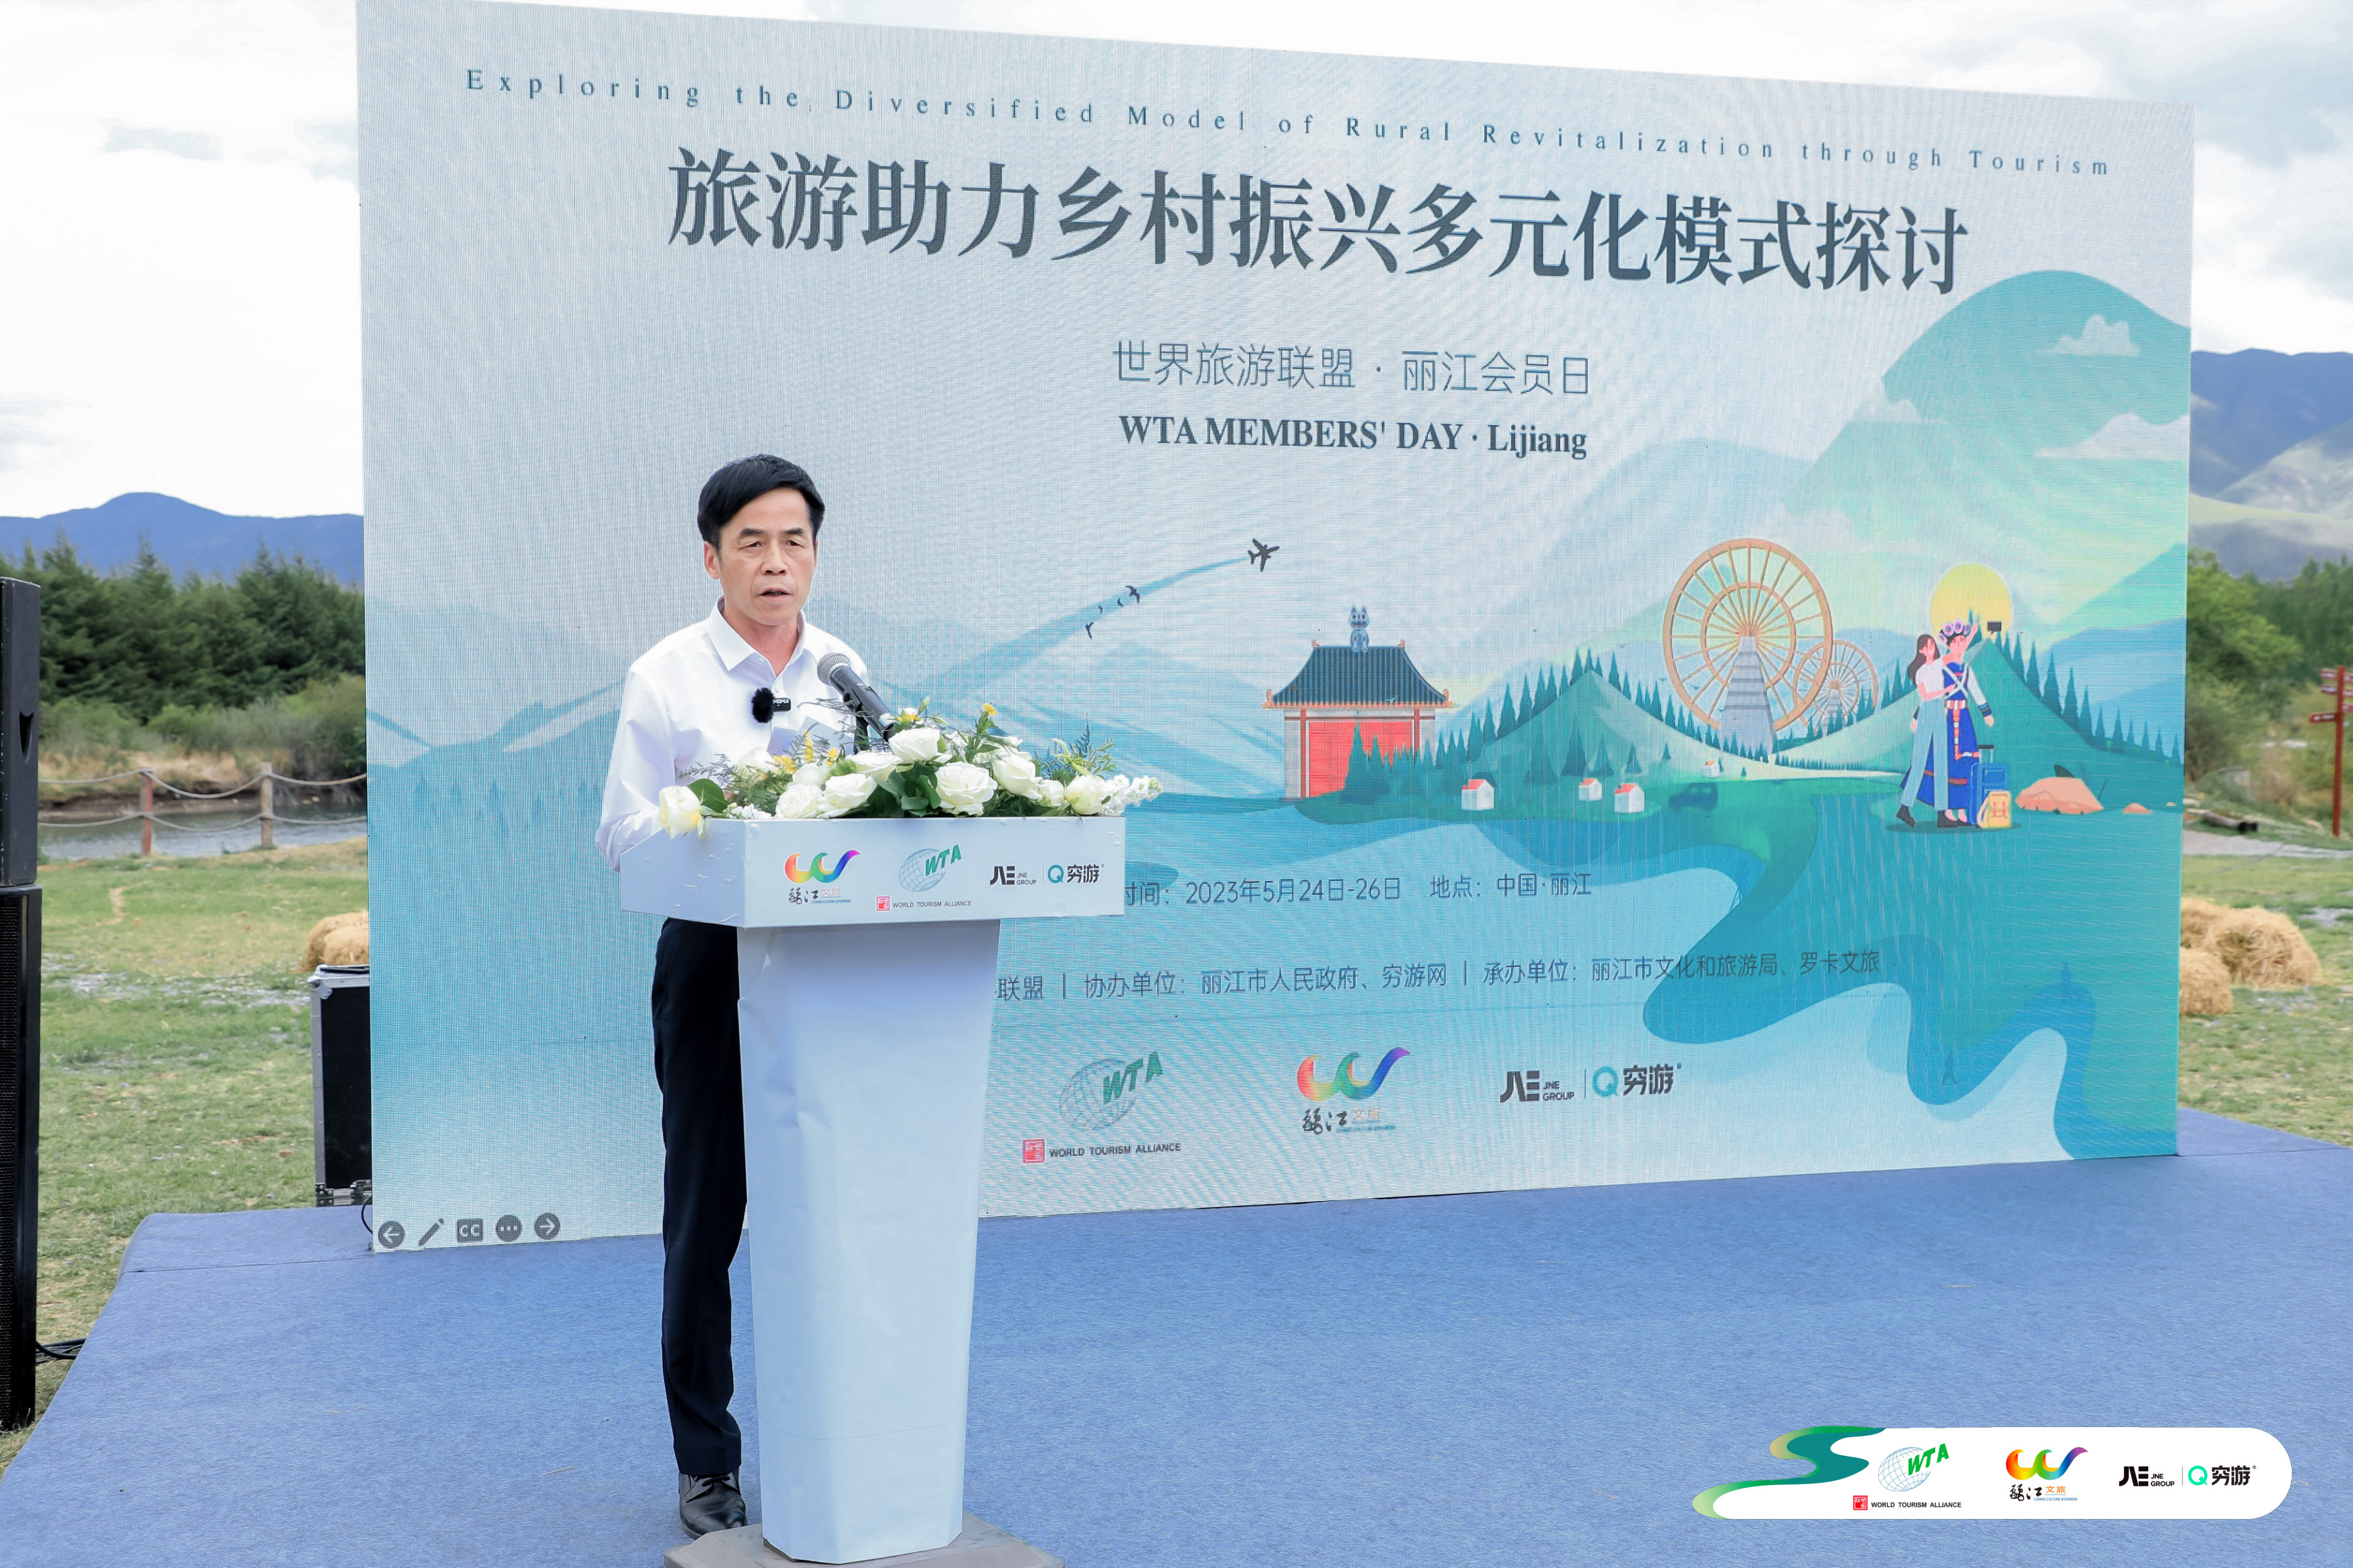 Bai Sizuo, Deputy Inspector of the Department of Resource Development of the Ministry of Culture and Tourism